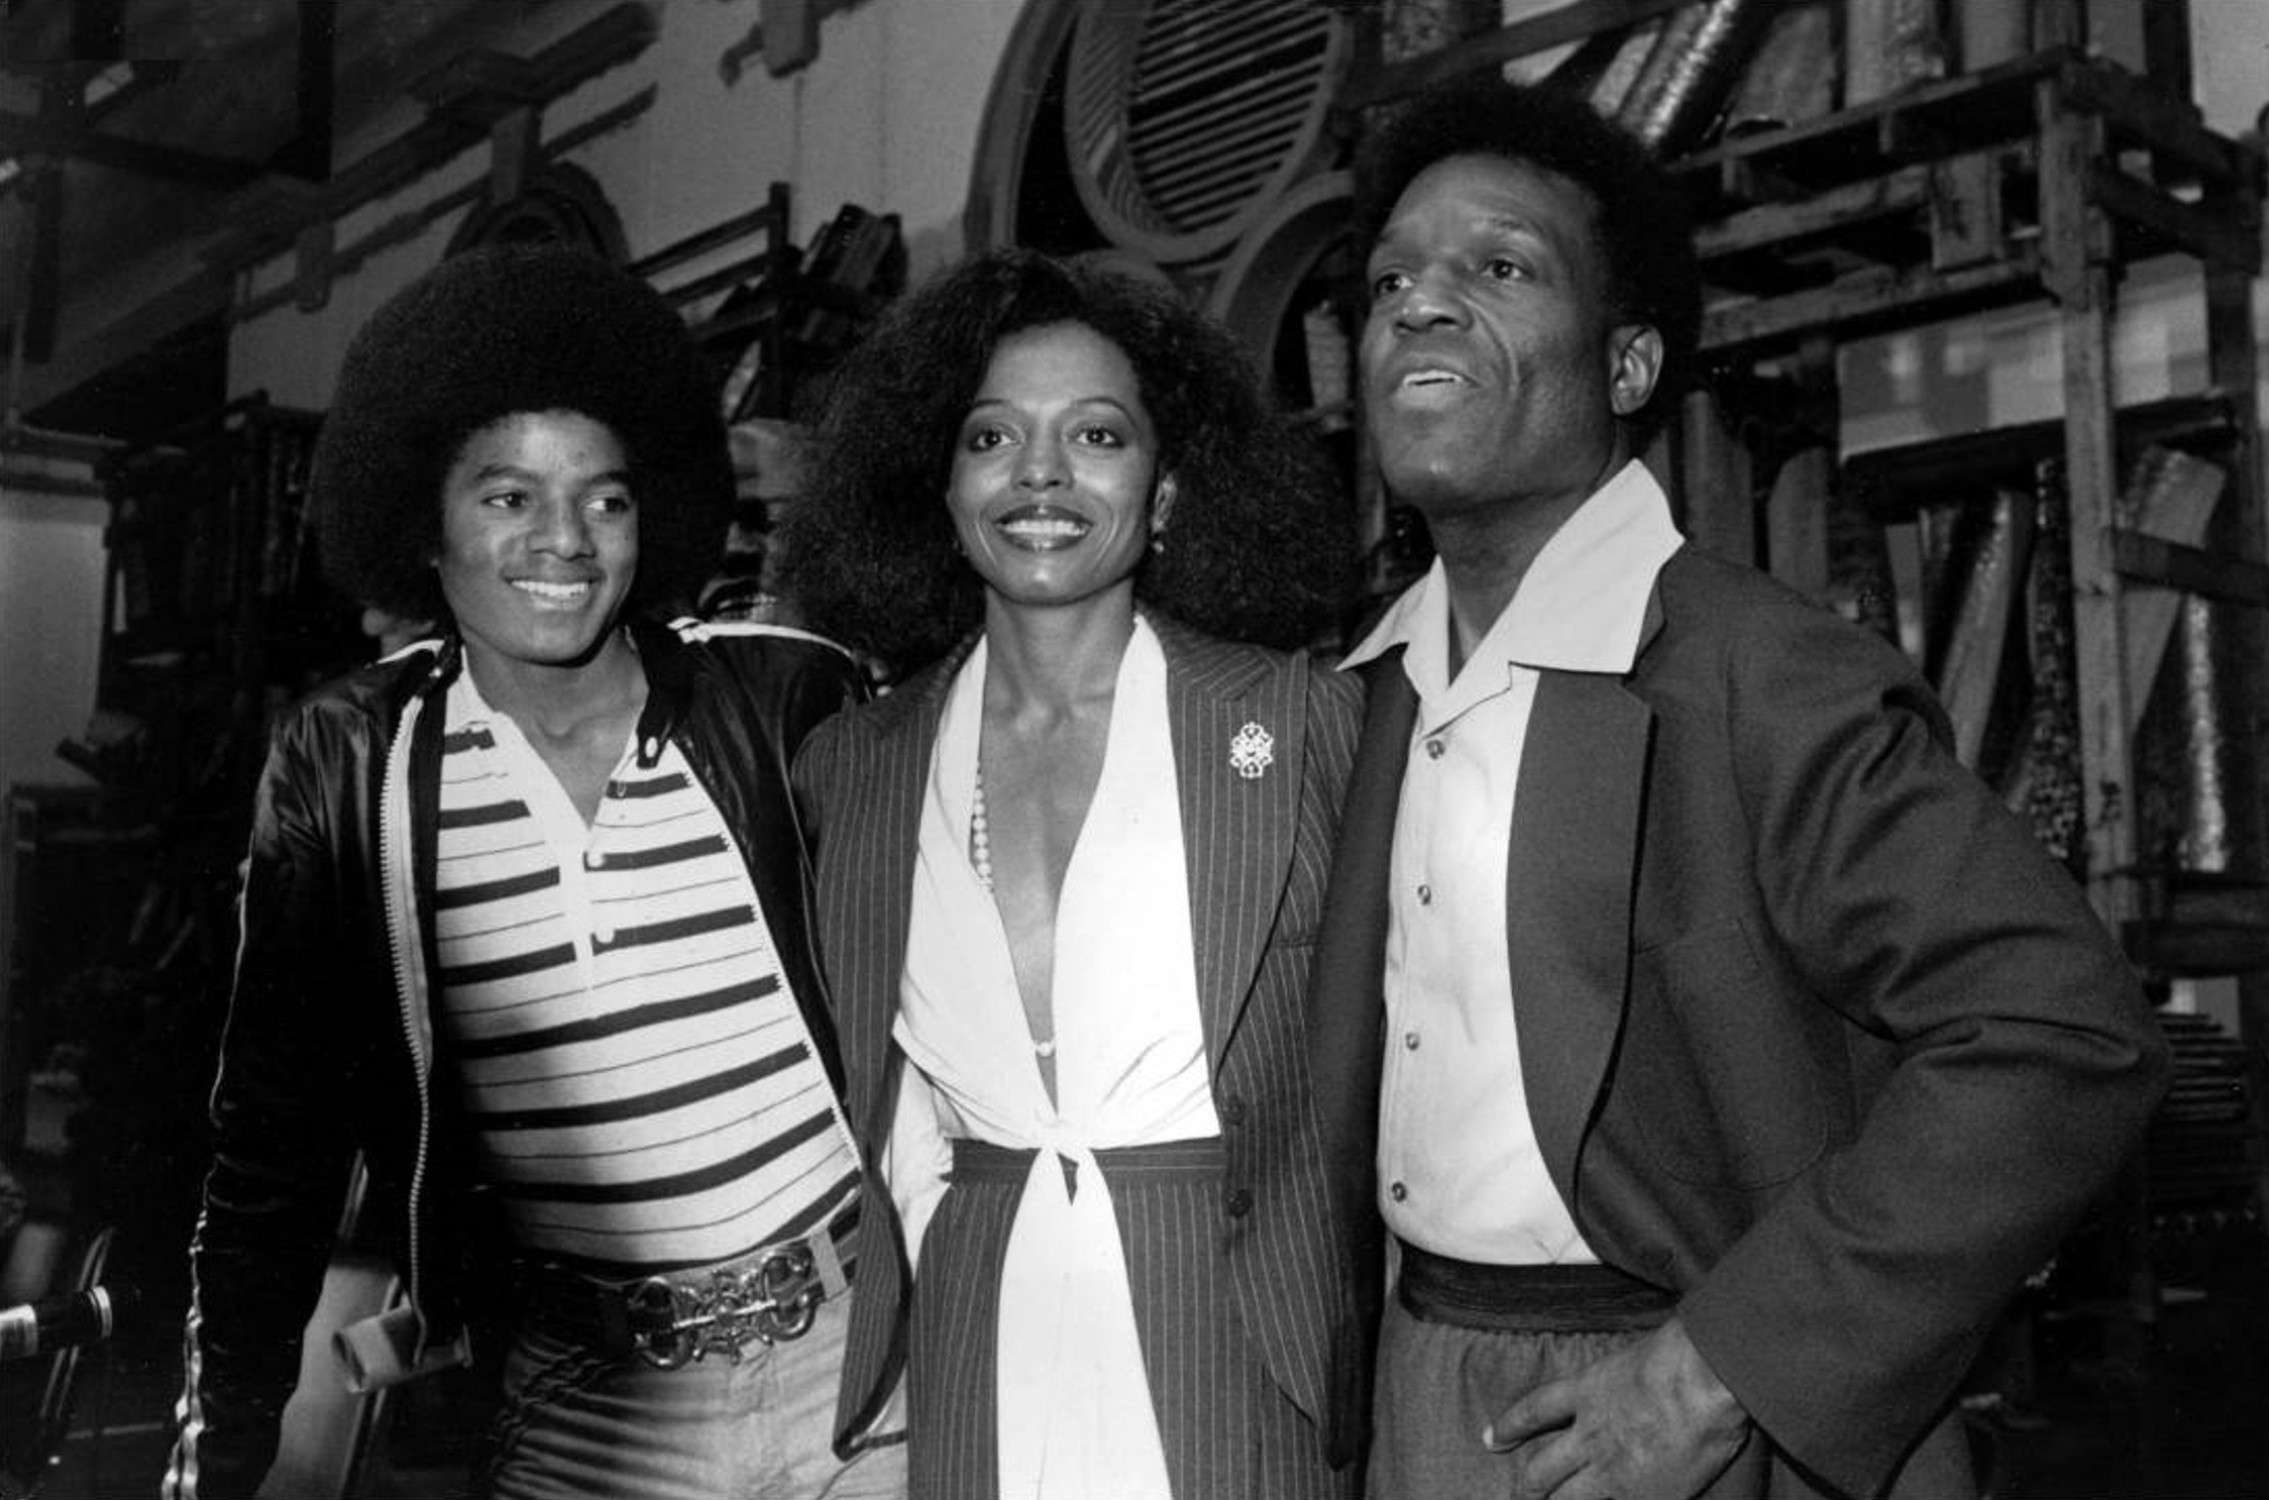 DIVULGAÇÃO - The Wiz - Michael Jackson and his The Wiz, Co-Also starring Diana Ross and Russell Nipsy attend a Press Conference for the premiere of the film. Imagem41